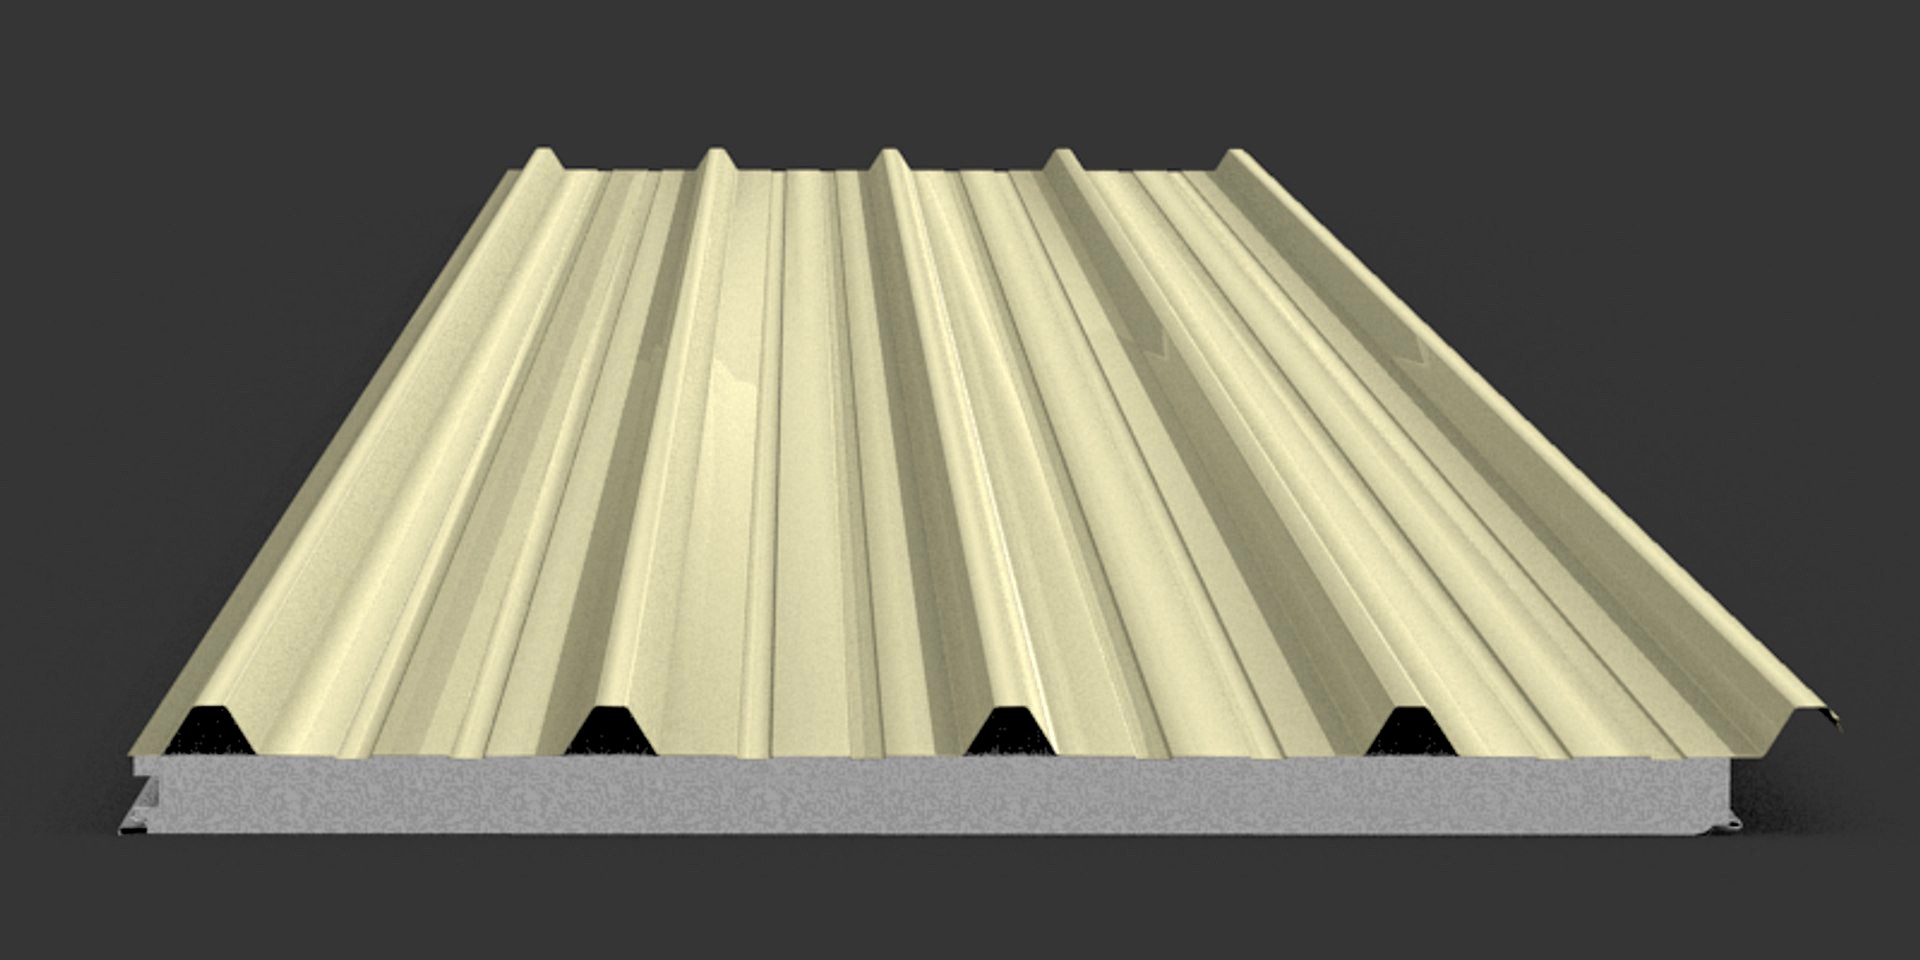 Trimdeck Insulated Roof 3D & 2D